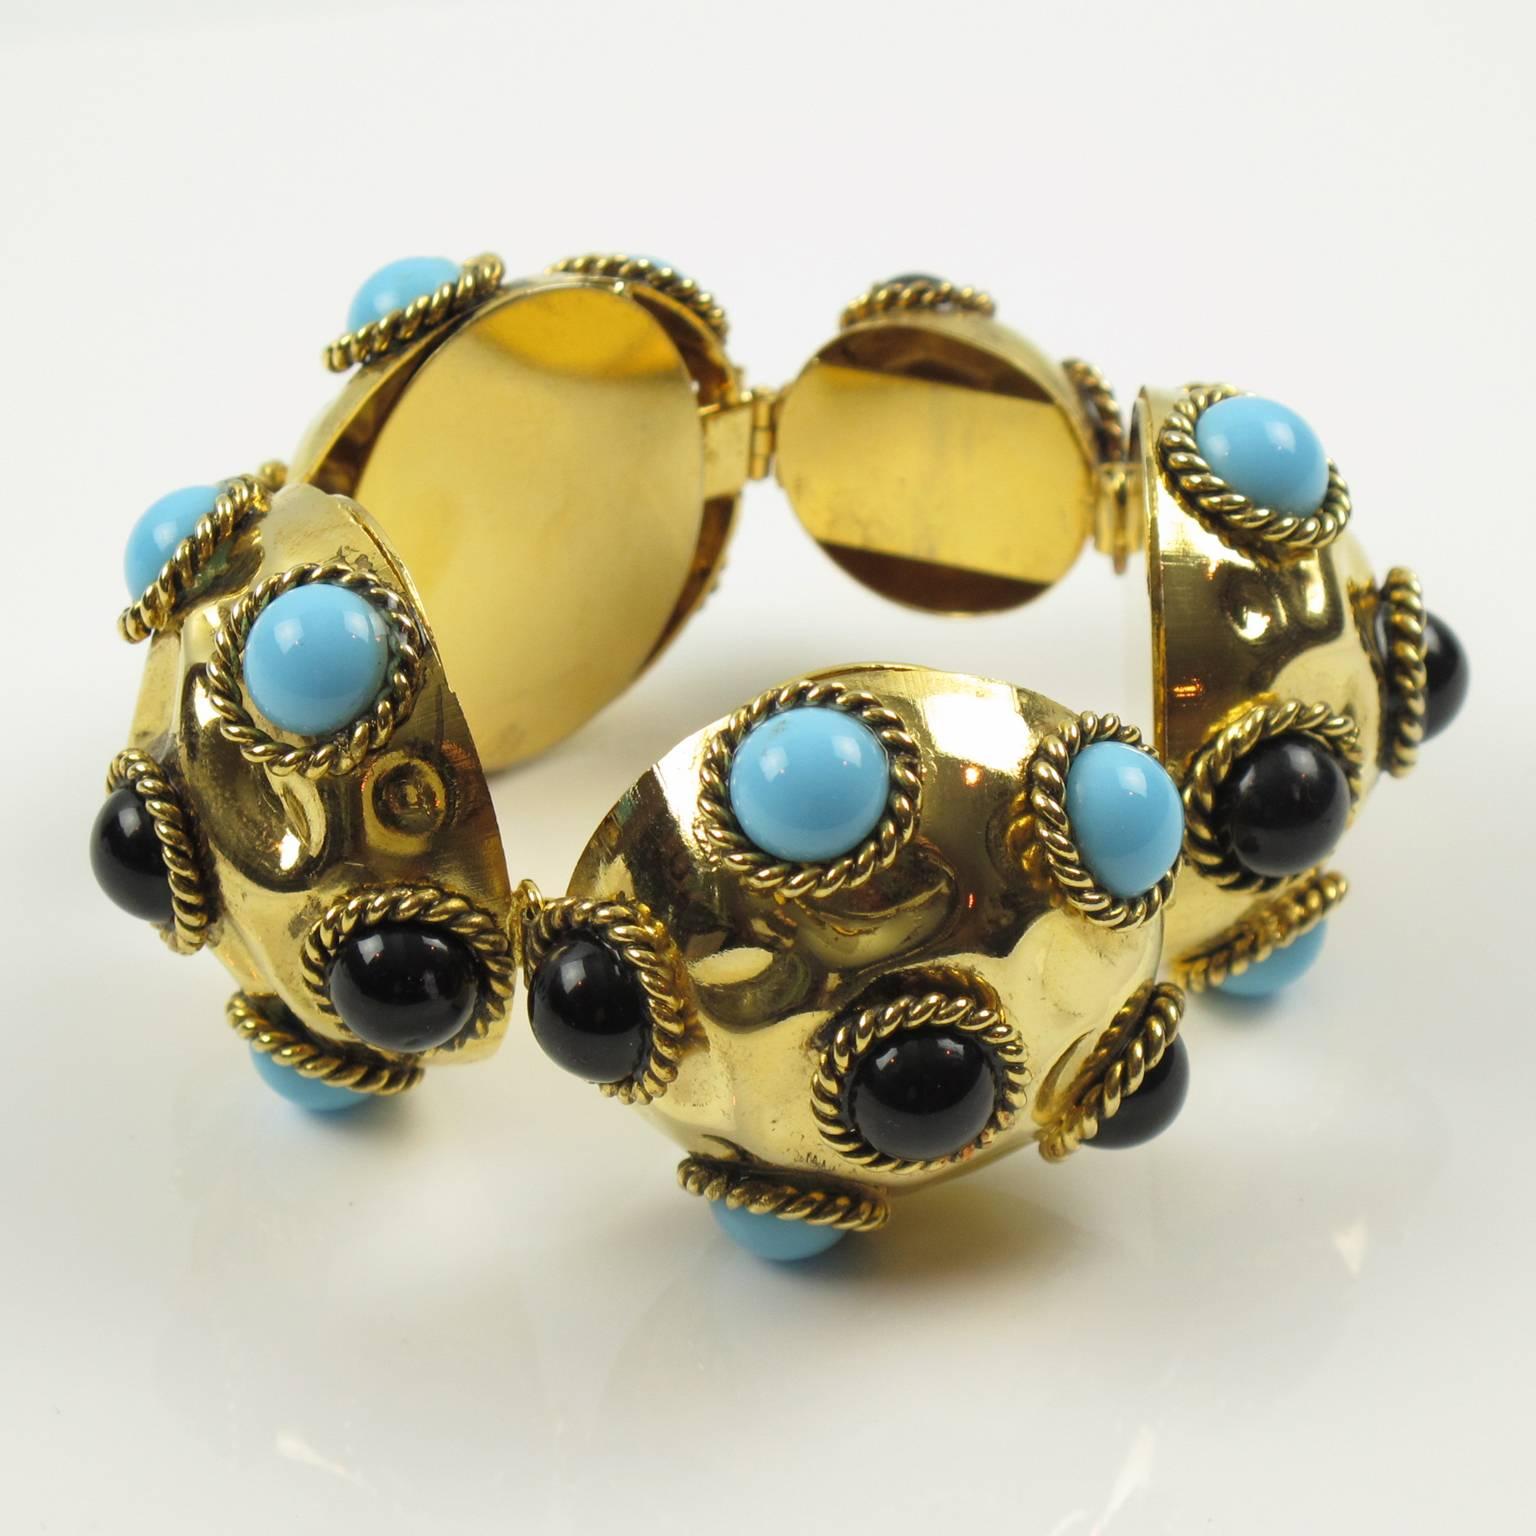 Elegant French Artisan designer jeweled link bracelet. Featuring large gilt metal domed elements topped with dark red resin cabochons and poured glass cabochons in imitation turquoise stone. Locking box clasp working great. No visible marking.